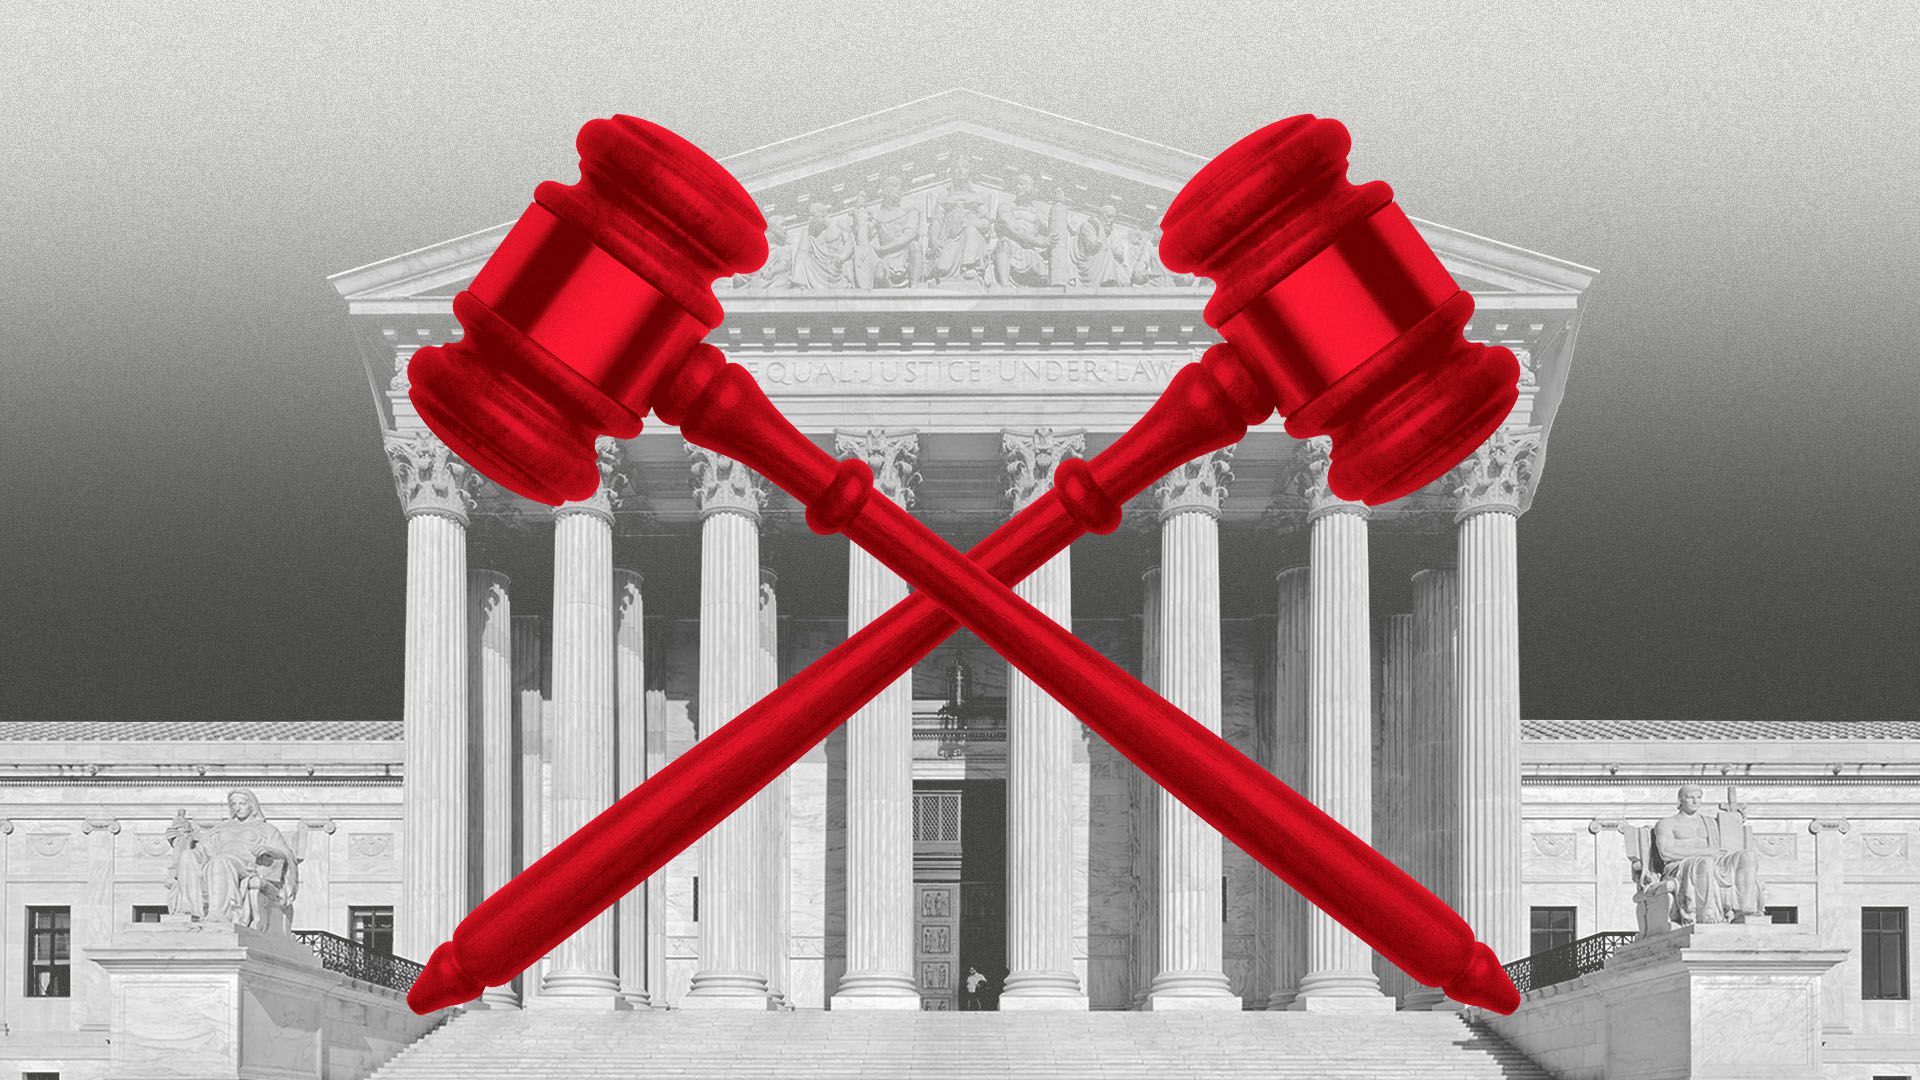 Illustration of two gavels forming an x in front of the Supreme Court building 